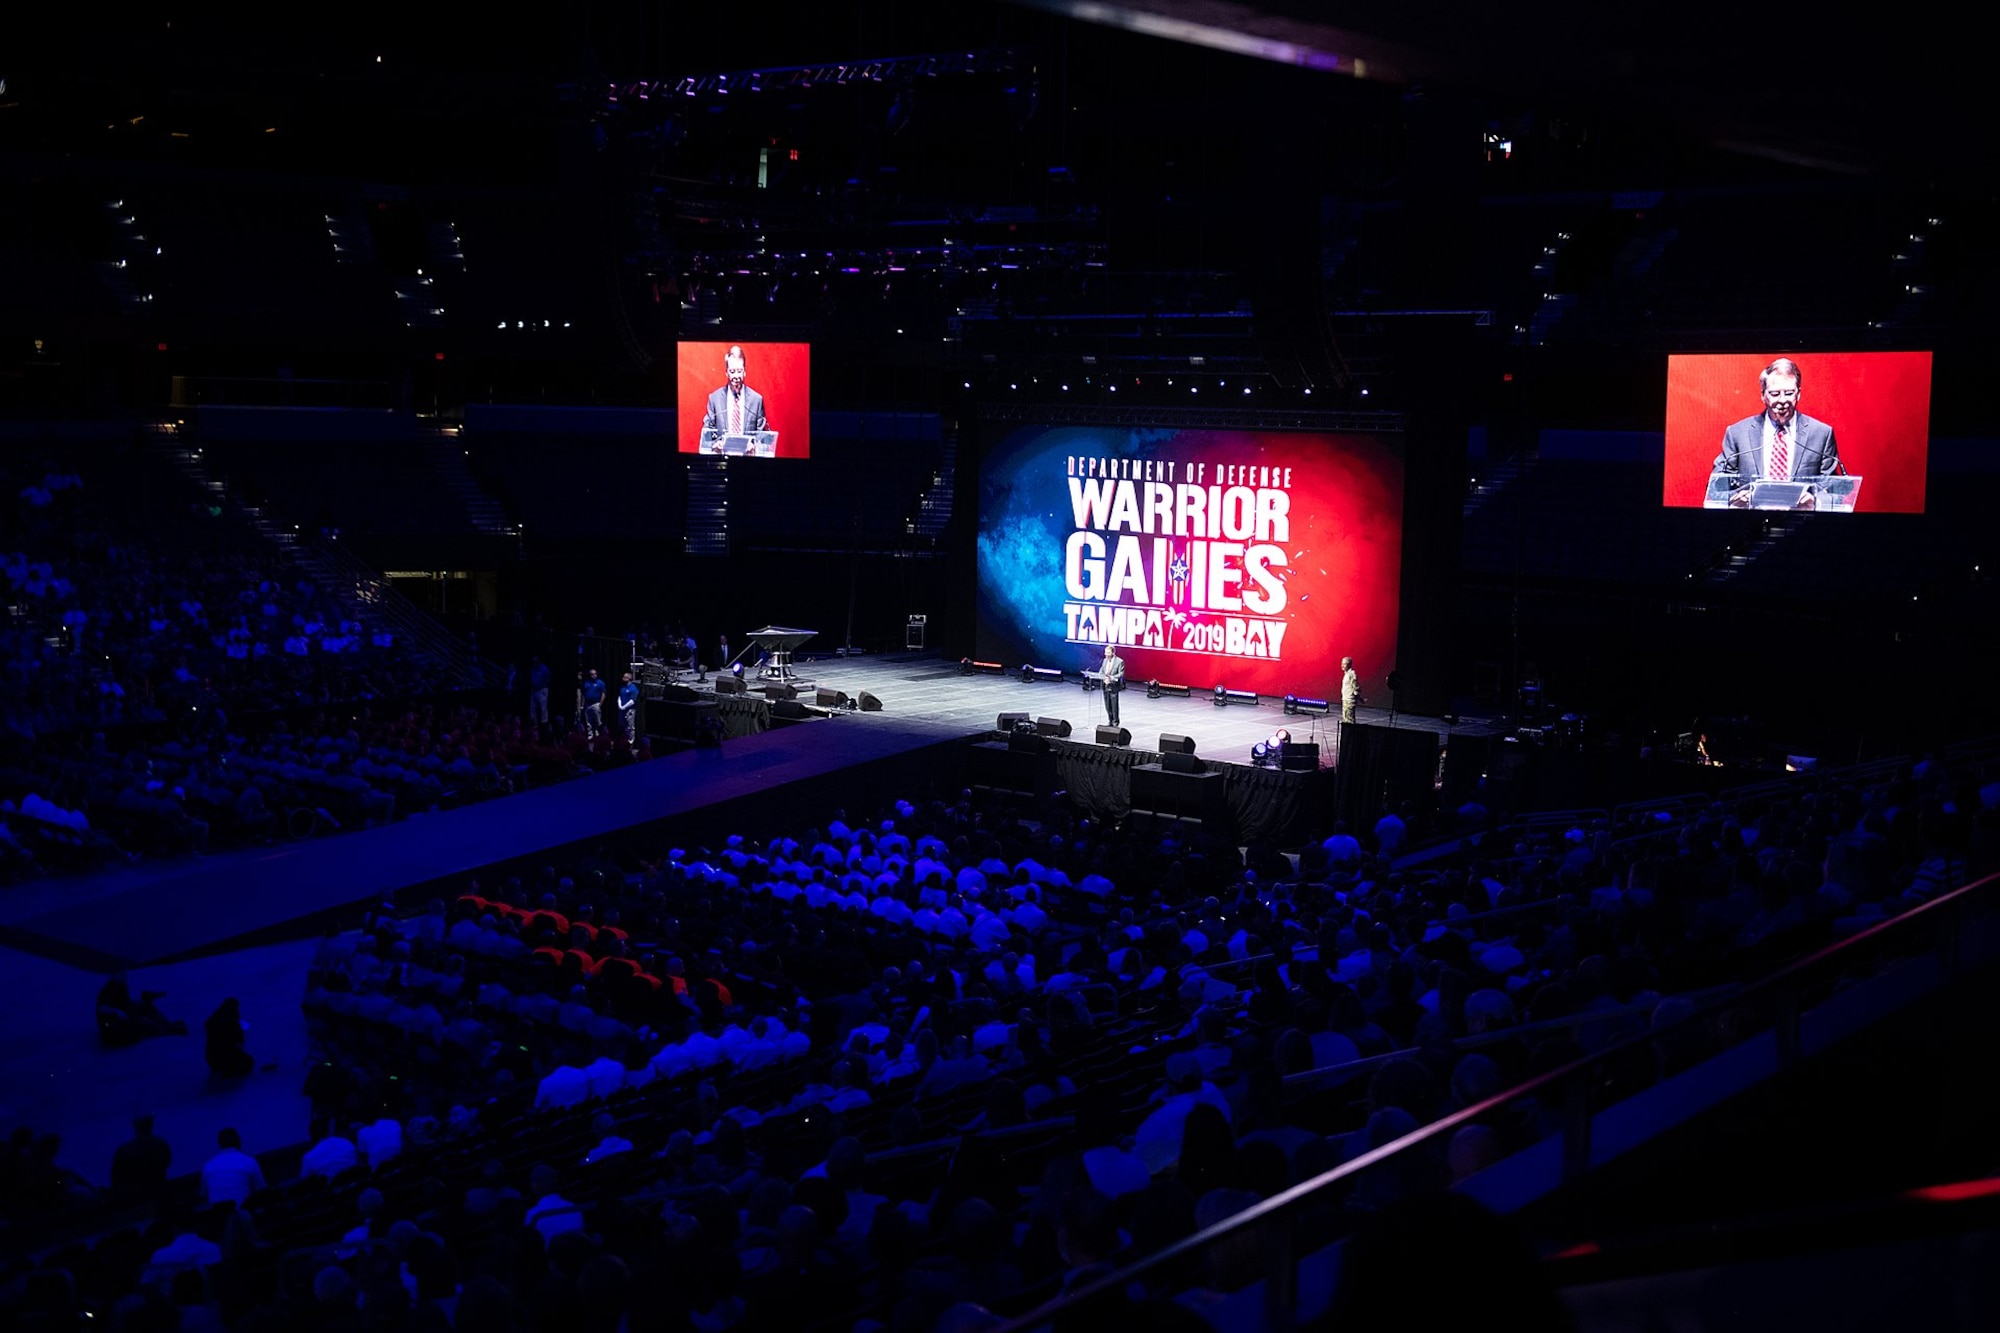 Mr. David L. Norquist, performing the duties of the U.S. deputy secretary of Defense, speaks during the 2019 Department of Defense Warrior Games Opening Ceremony in Tampa Bay, Fla., June 22, 2019. Approximately 300 wounded, ill and injured service members and veterans will participate in 13 athletic competitions over 10 days as U.S. Special Operations Command hosts the 2019 DoD Warrior Games. (DoD photo by U.S. Army Sgt. James K. McCann)